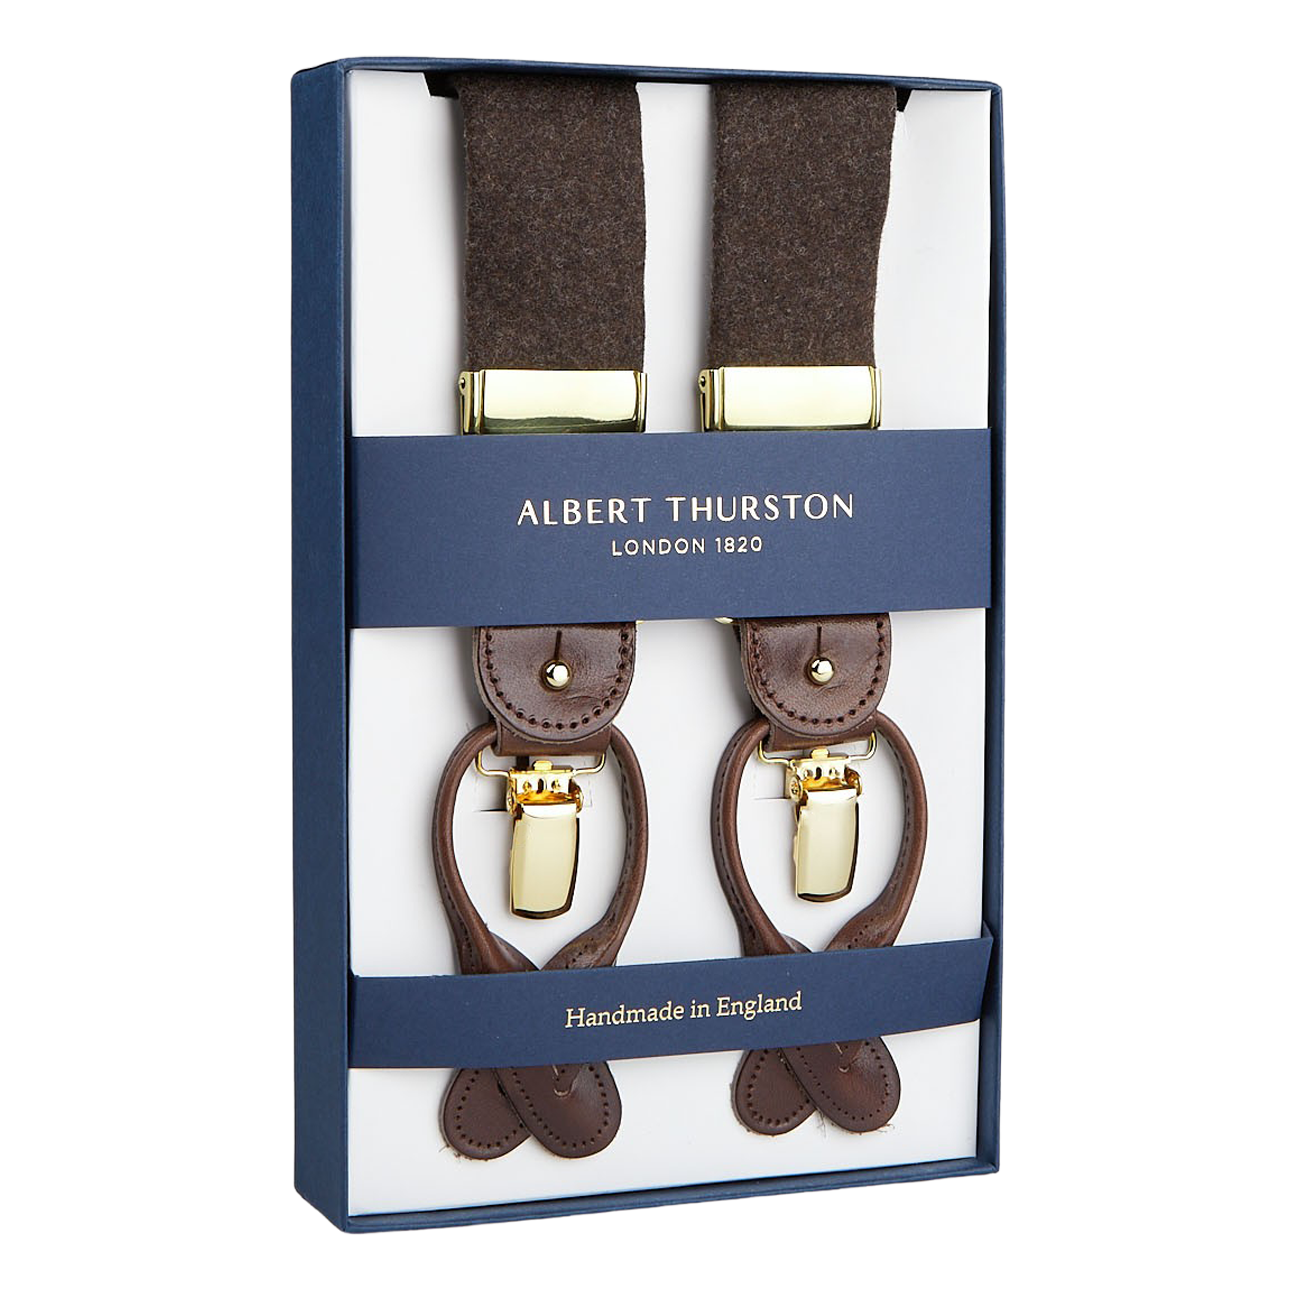 A boxed Albert Thurston Brown Wool Flannel 35 mm Braces set with leather fittings, handmade in England.